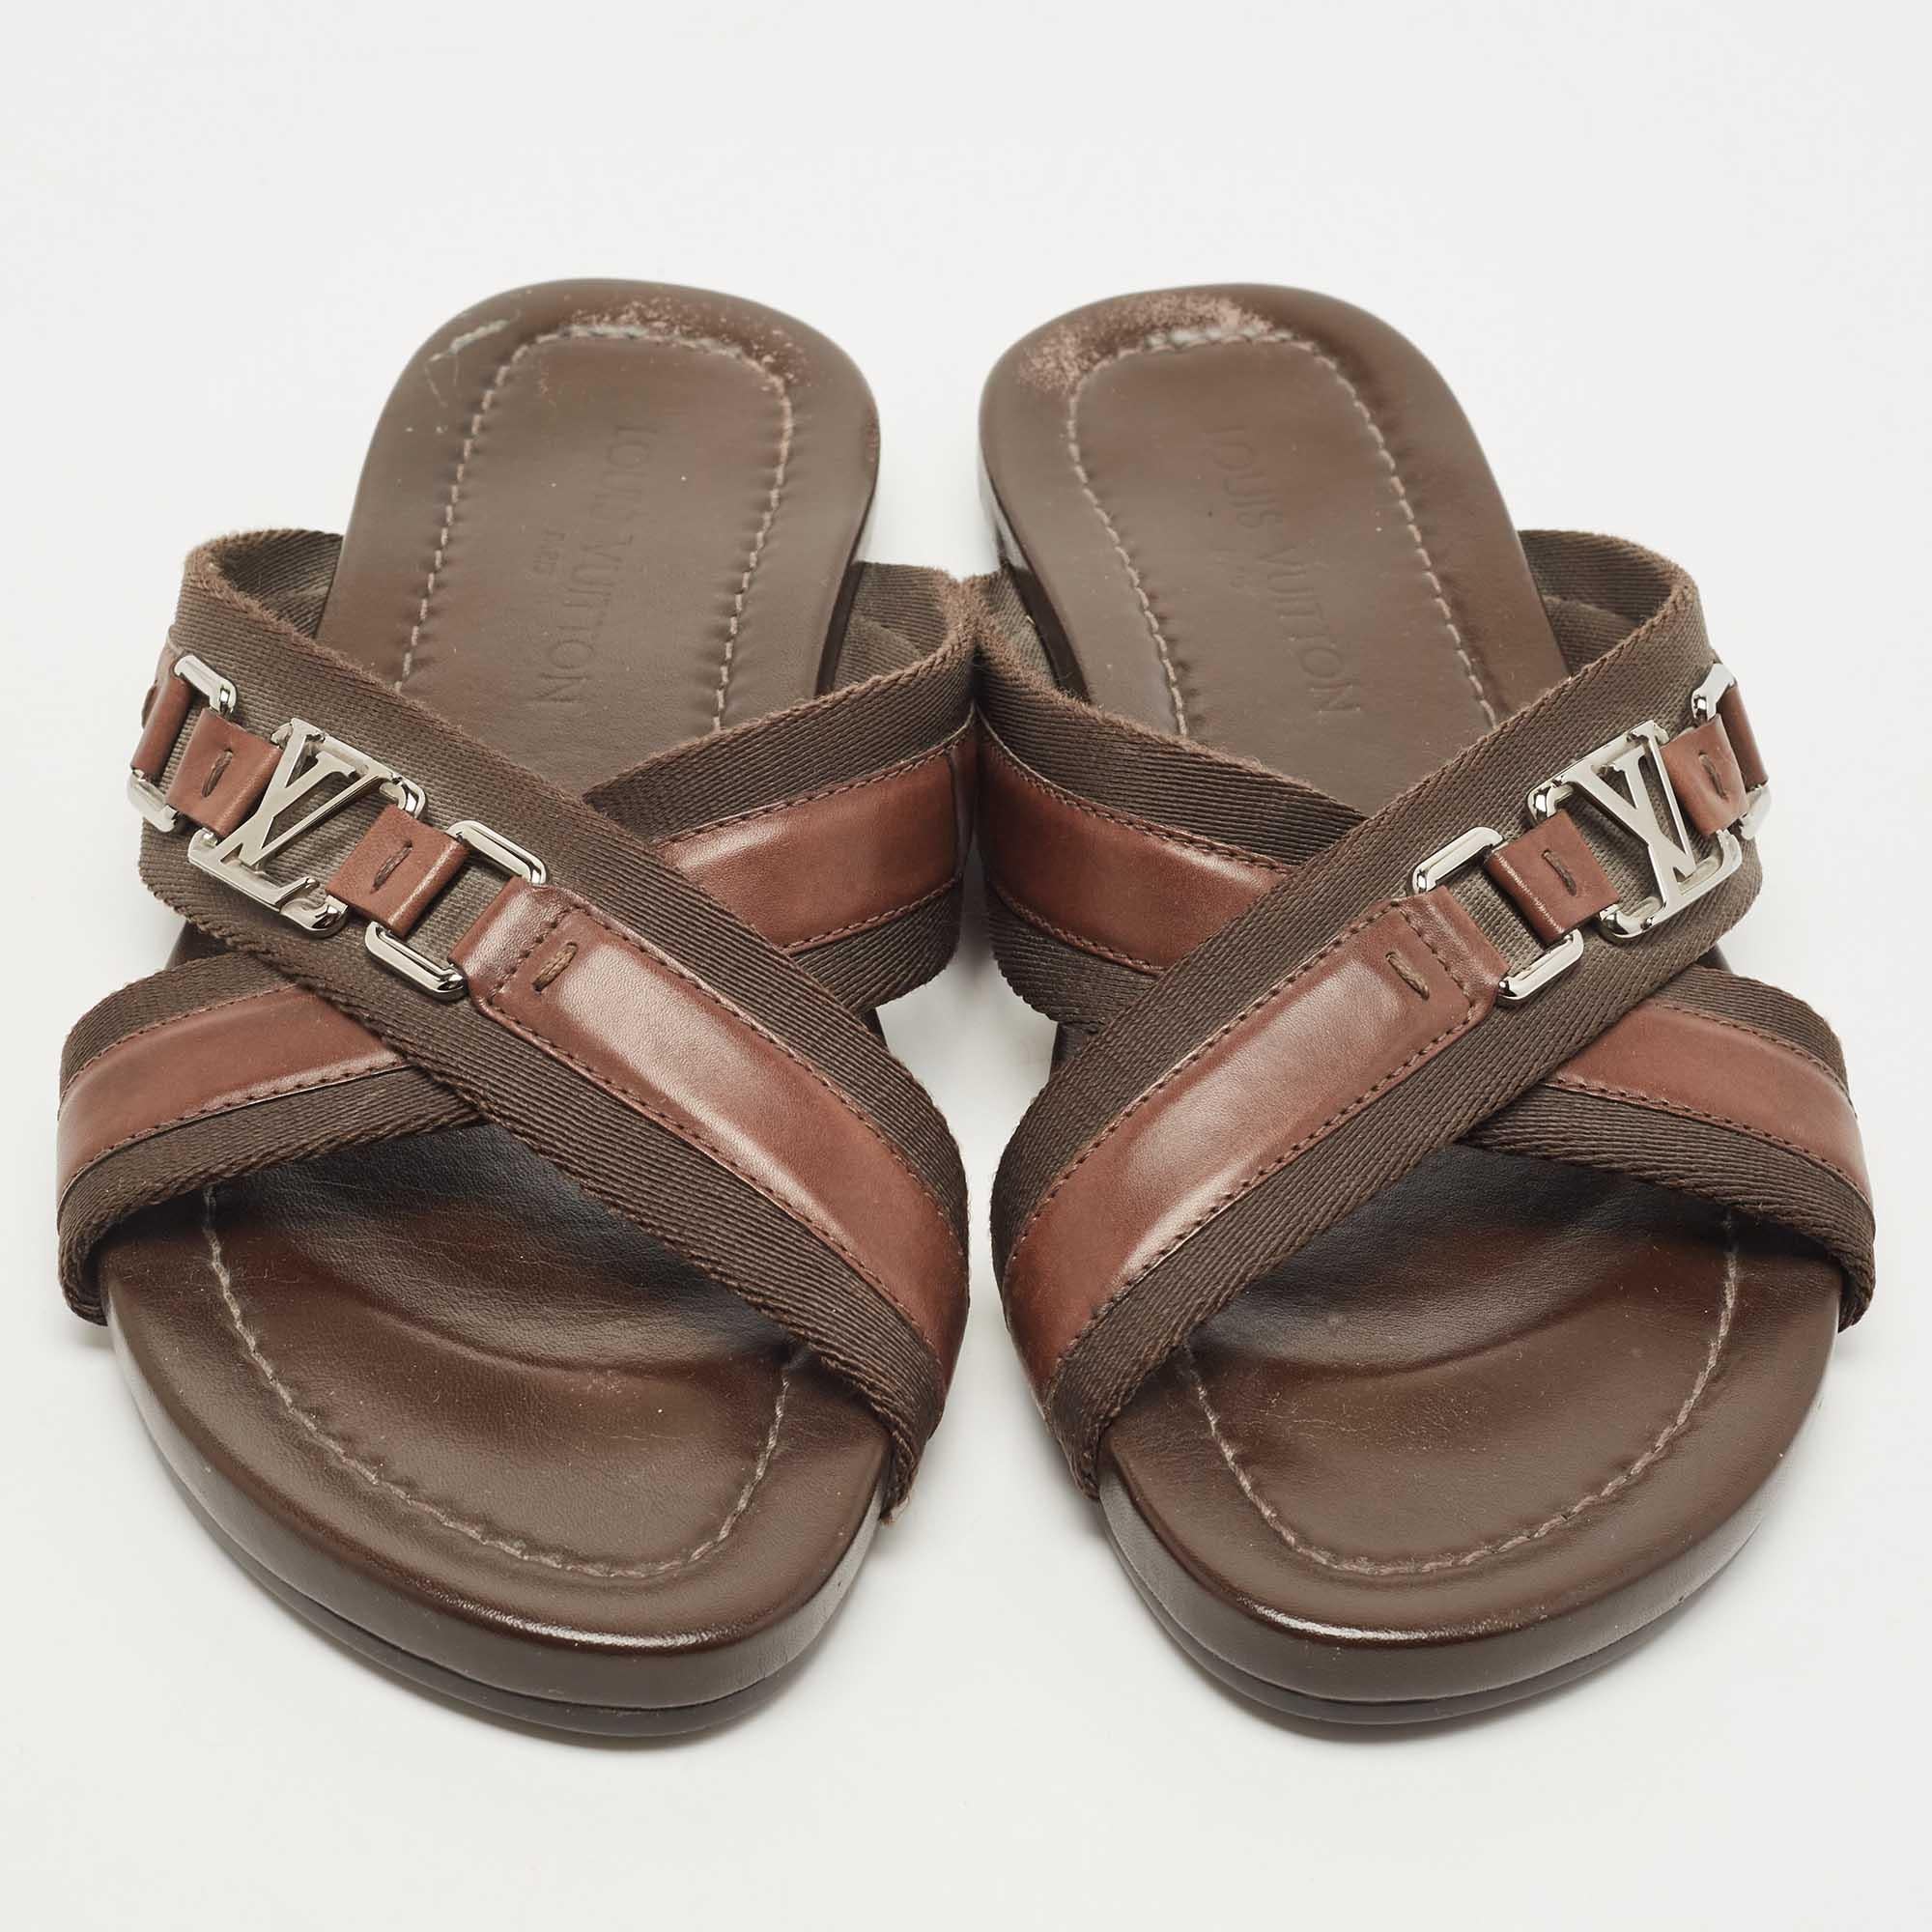 Louis Vuitton - Authenticated Bom Dia Sandal - Rubber Brown Abstract for Women, Very Good Condition